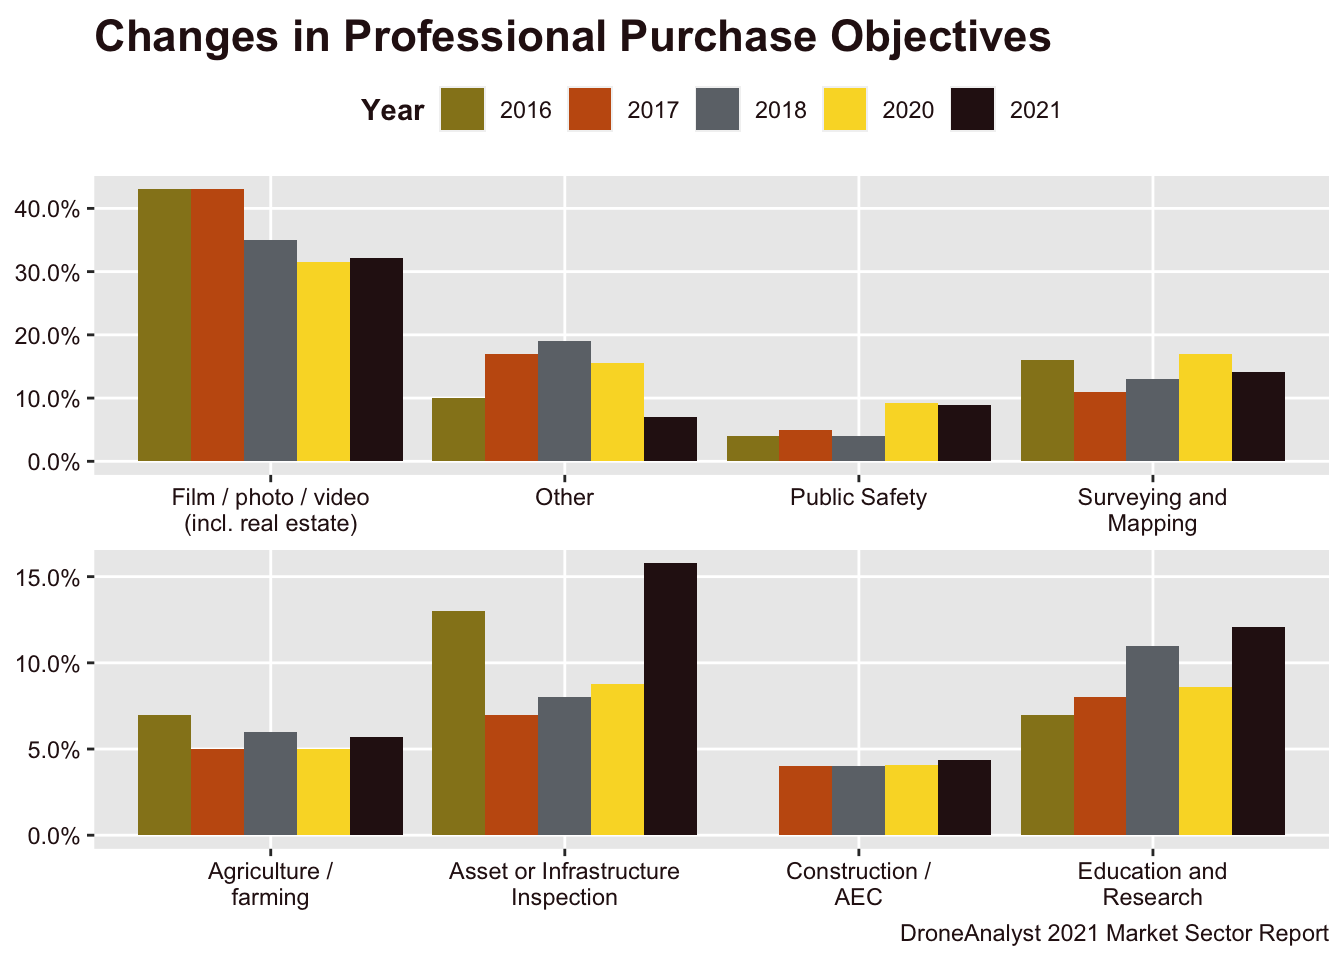 Changes in Professional Purchase Objectives